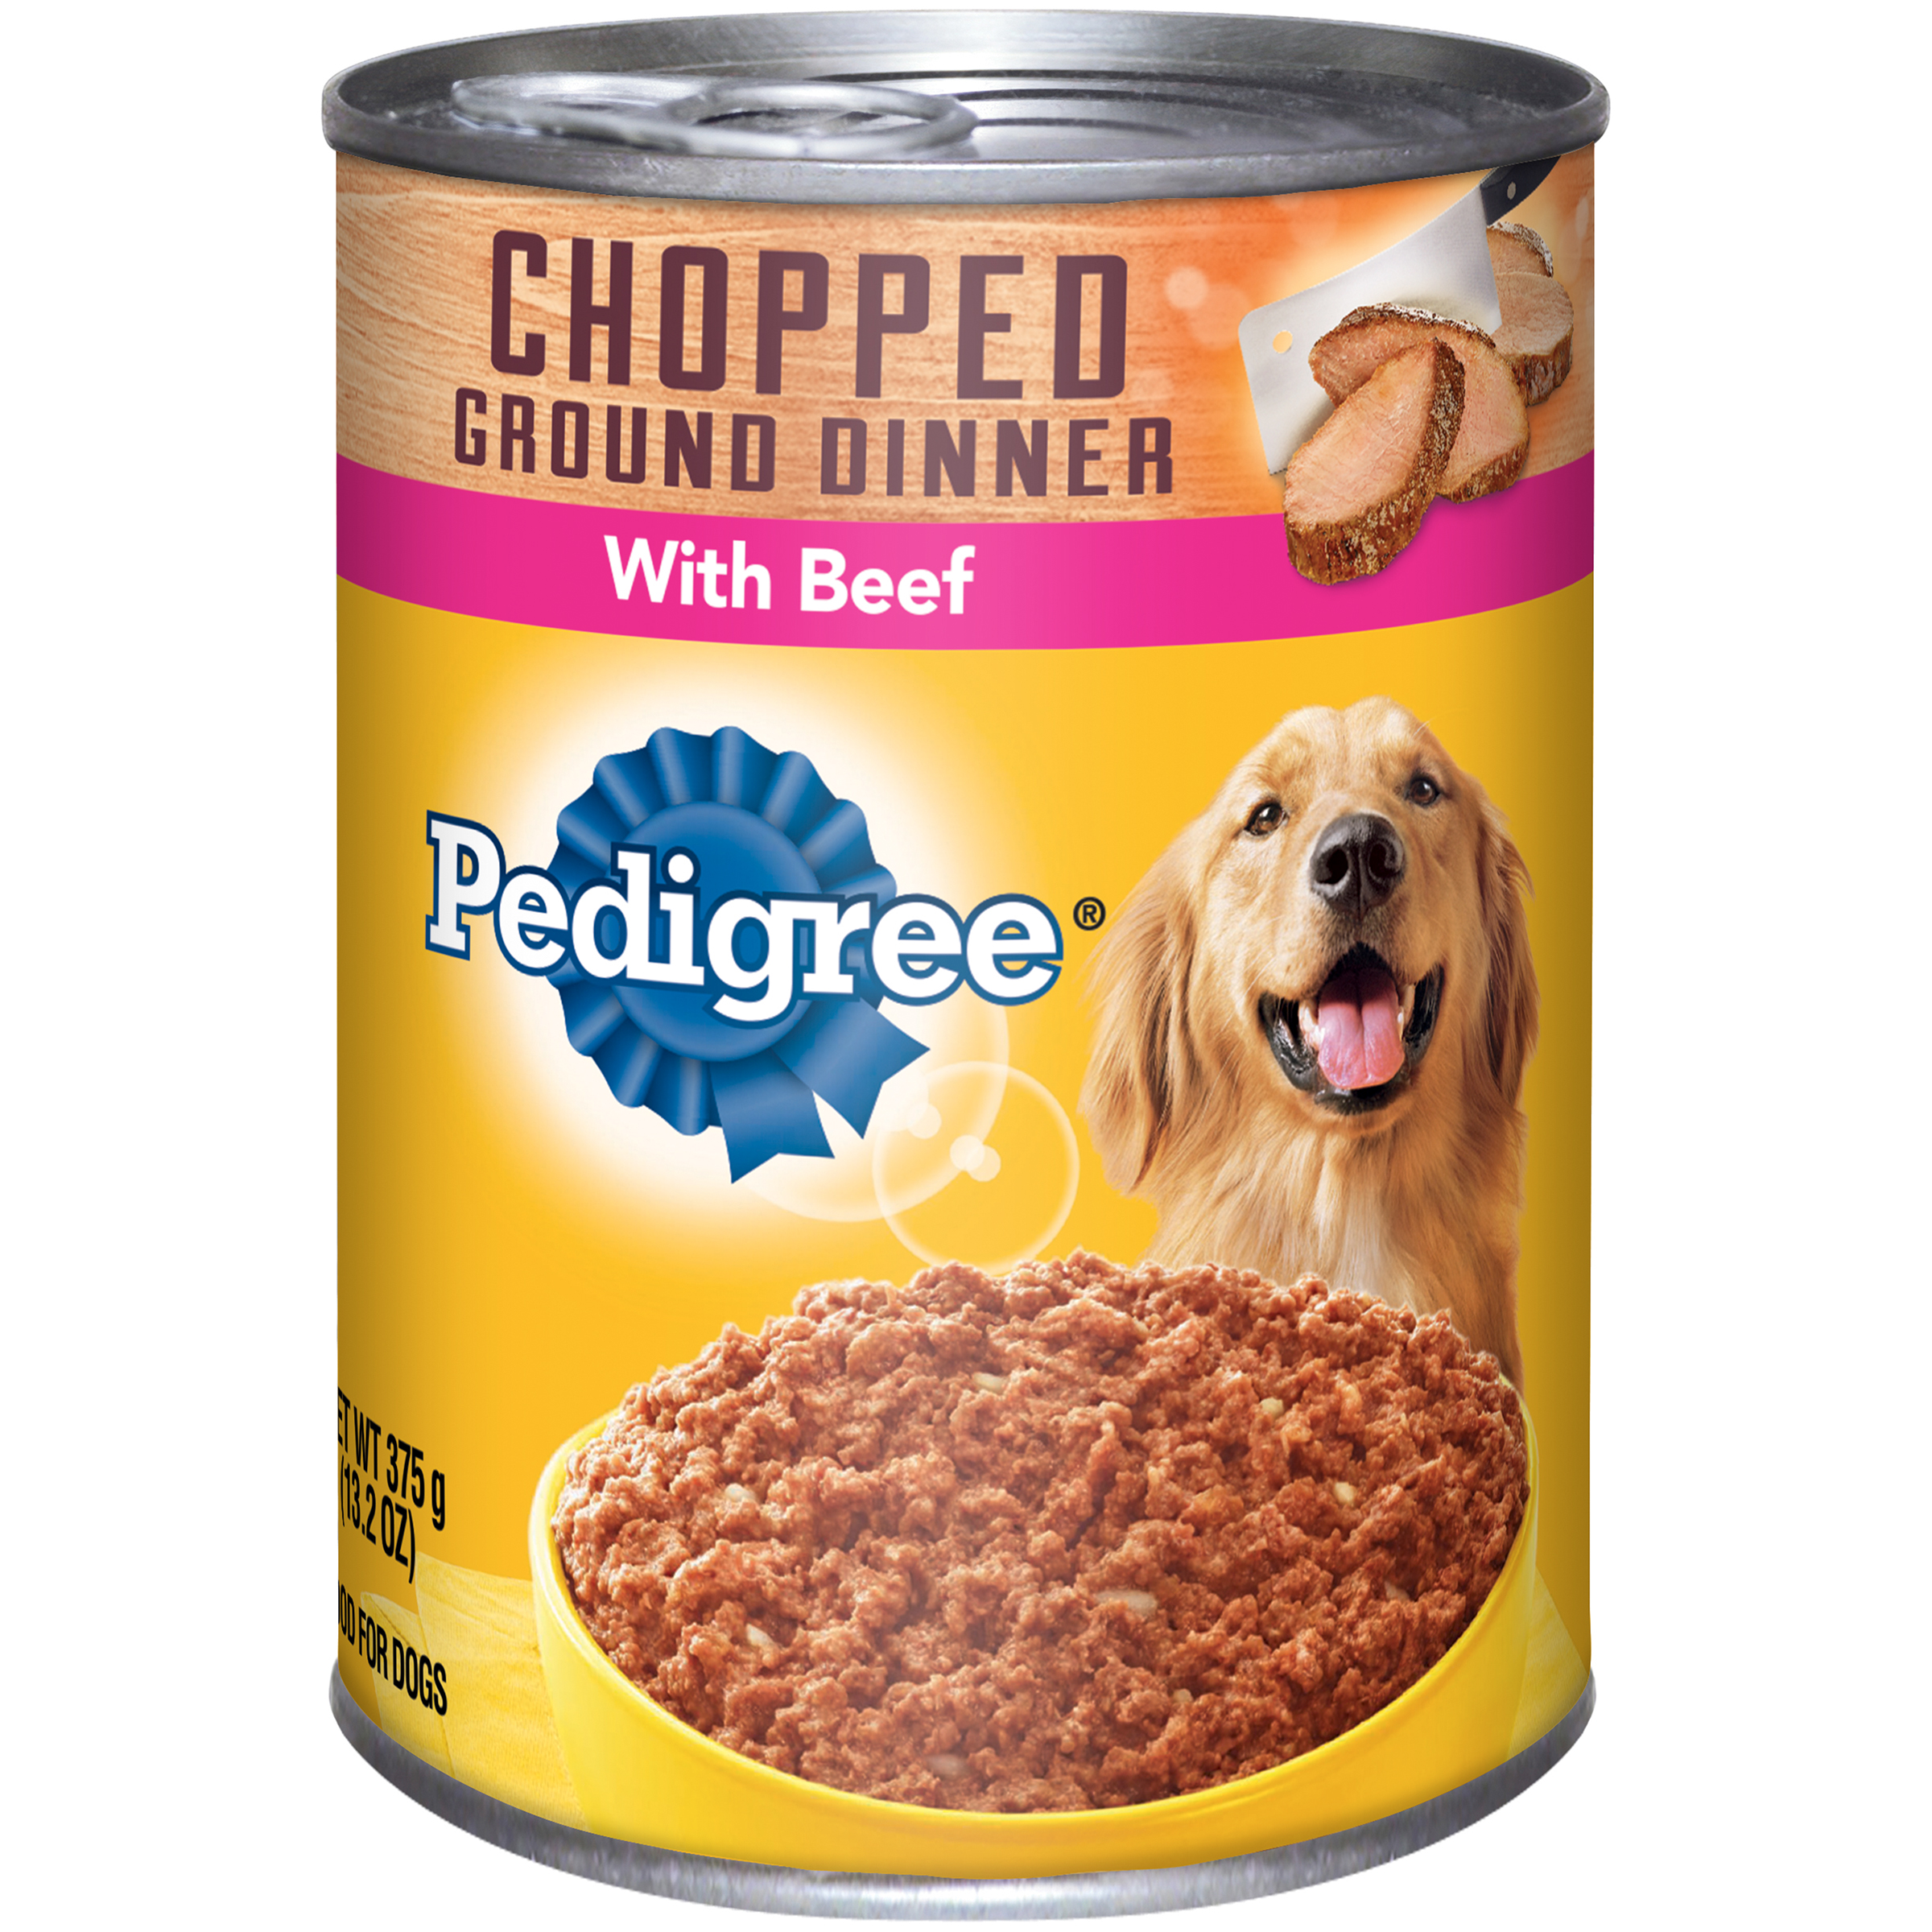 Pedigree Food for Adult Dogs, Traditional Ground Dinner